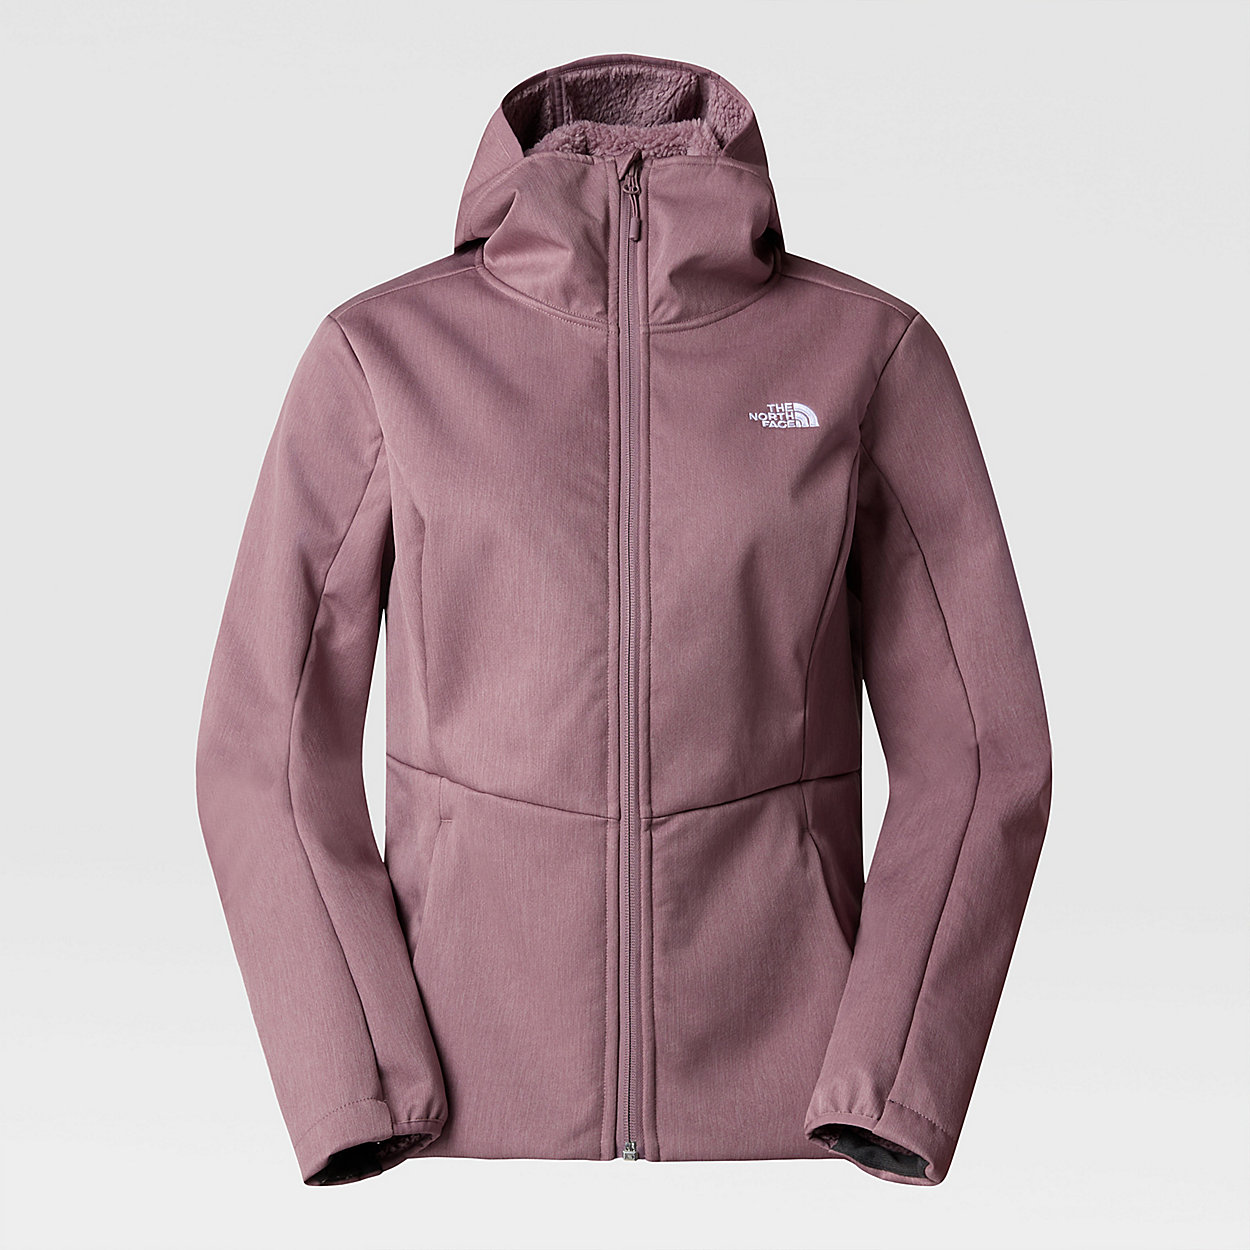 Unlock Wilderness' choice in the Mountain Warehouse Vs North Face comparison, the Quest Highloft Softshell Jacket by The North Face